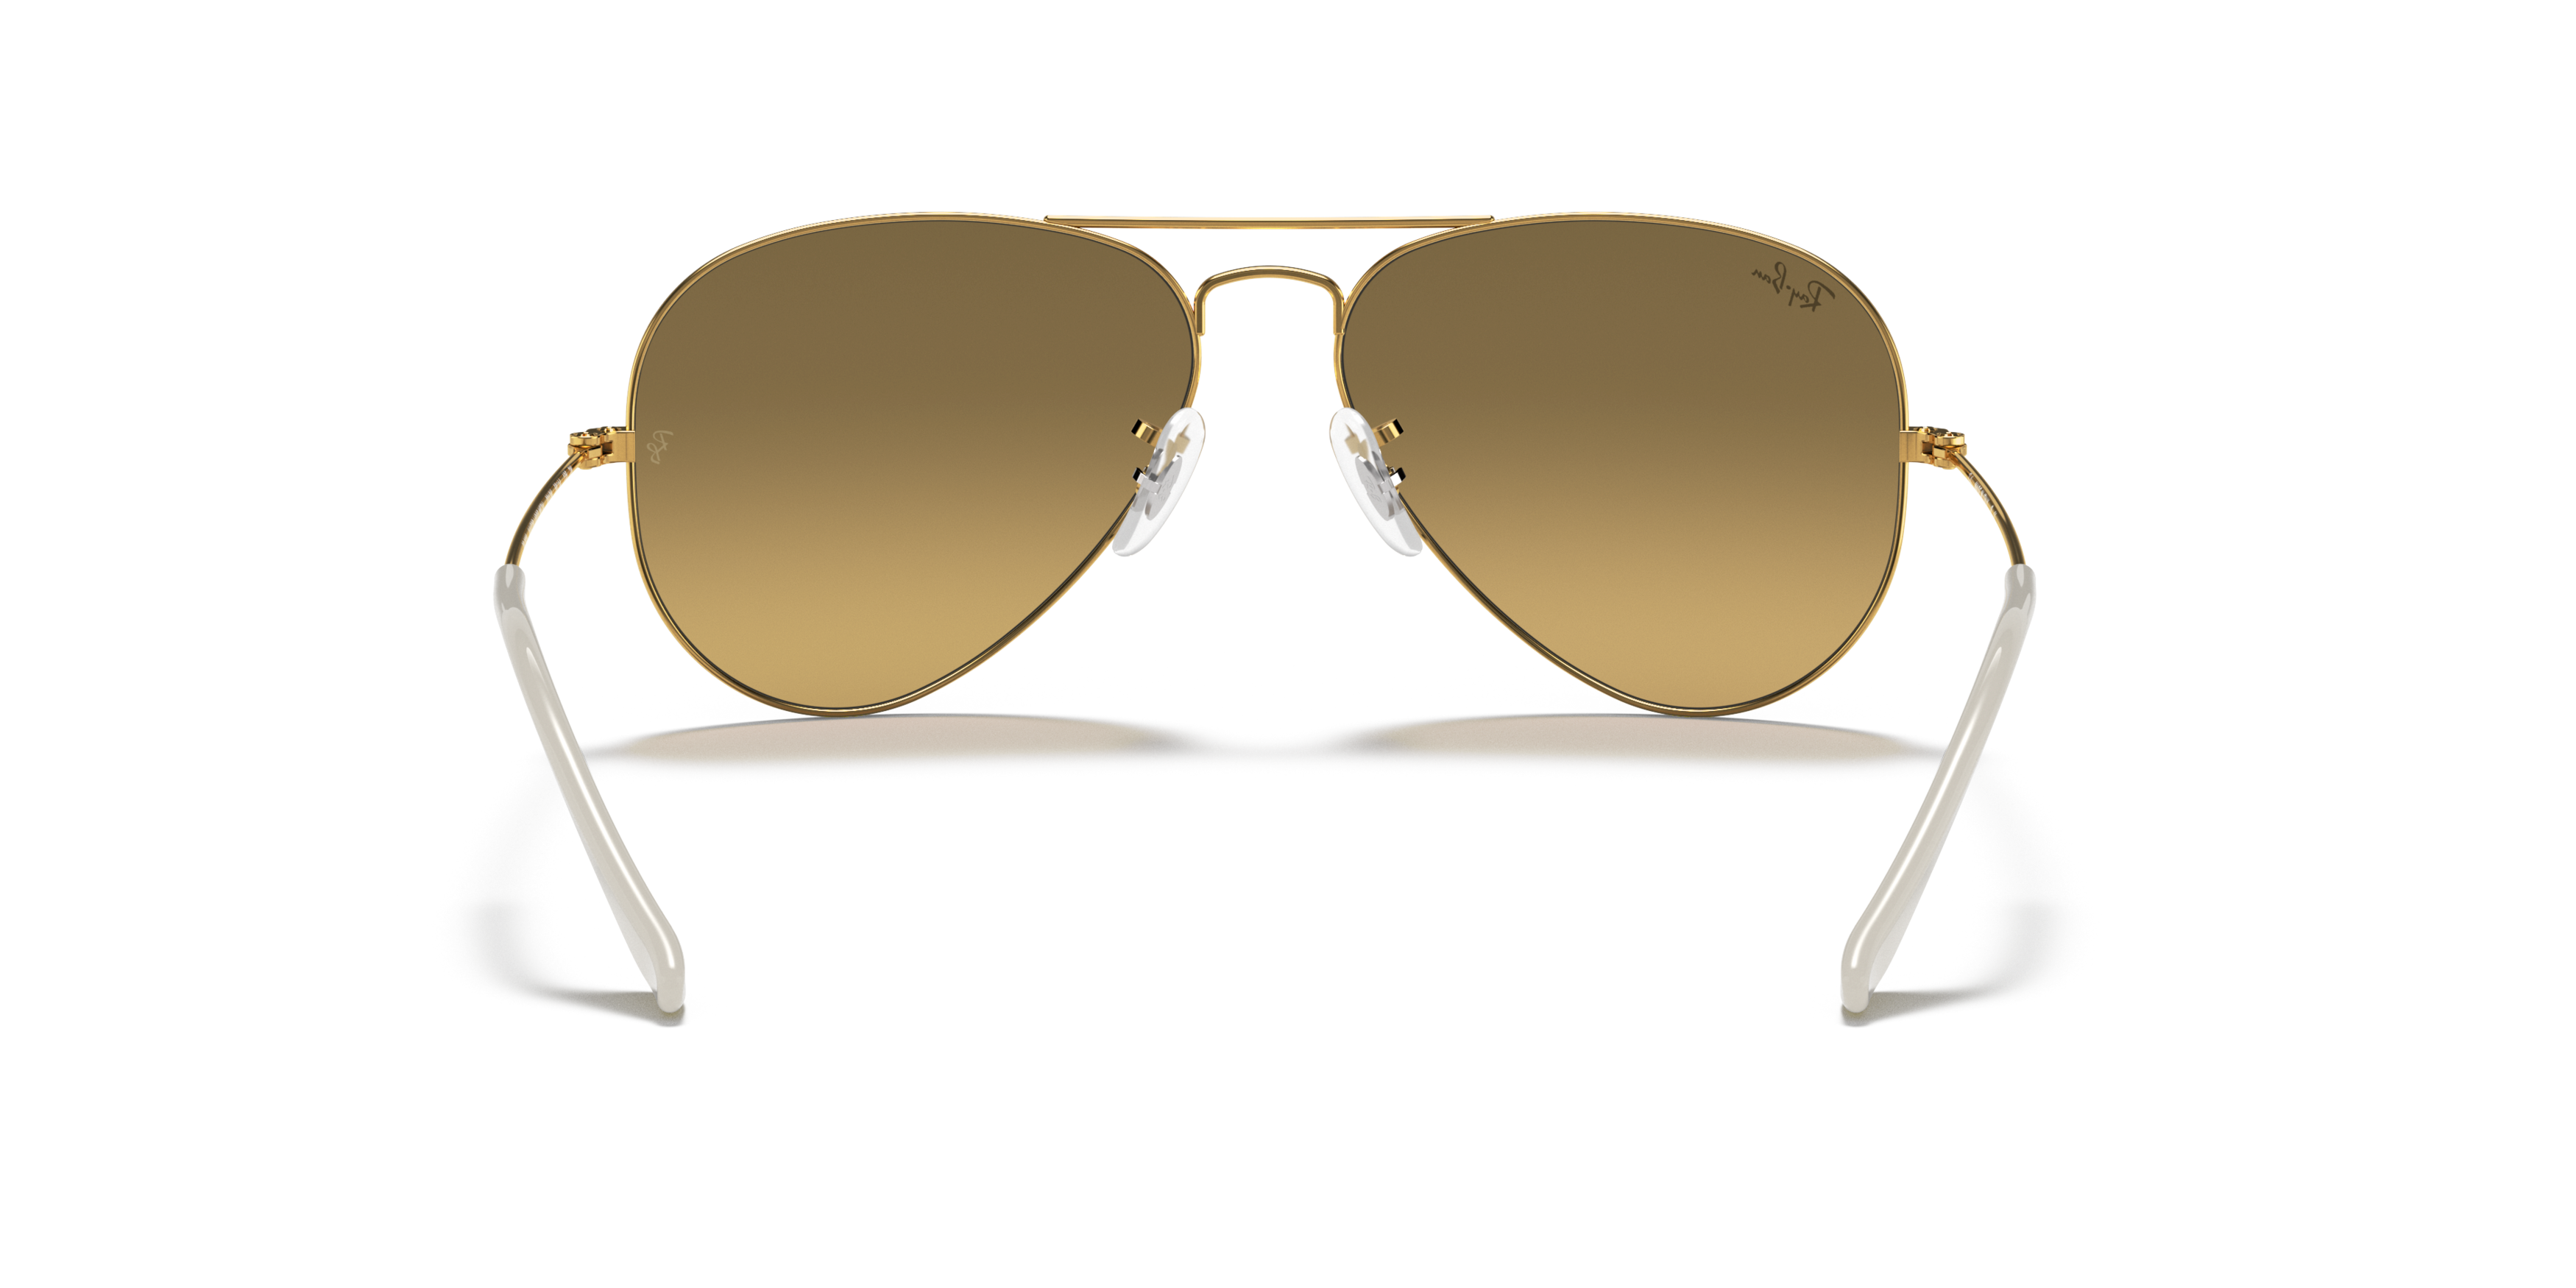 [products.image.detail02] Ray-Ban Aviator Large Metal RB3025 001/3K